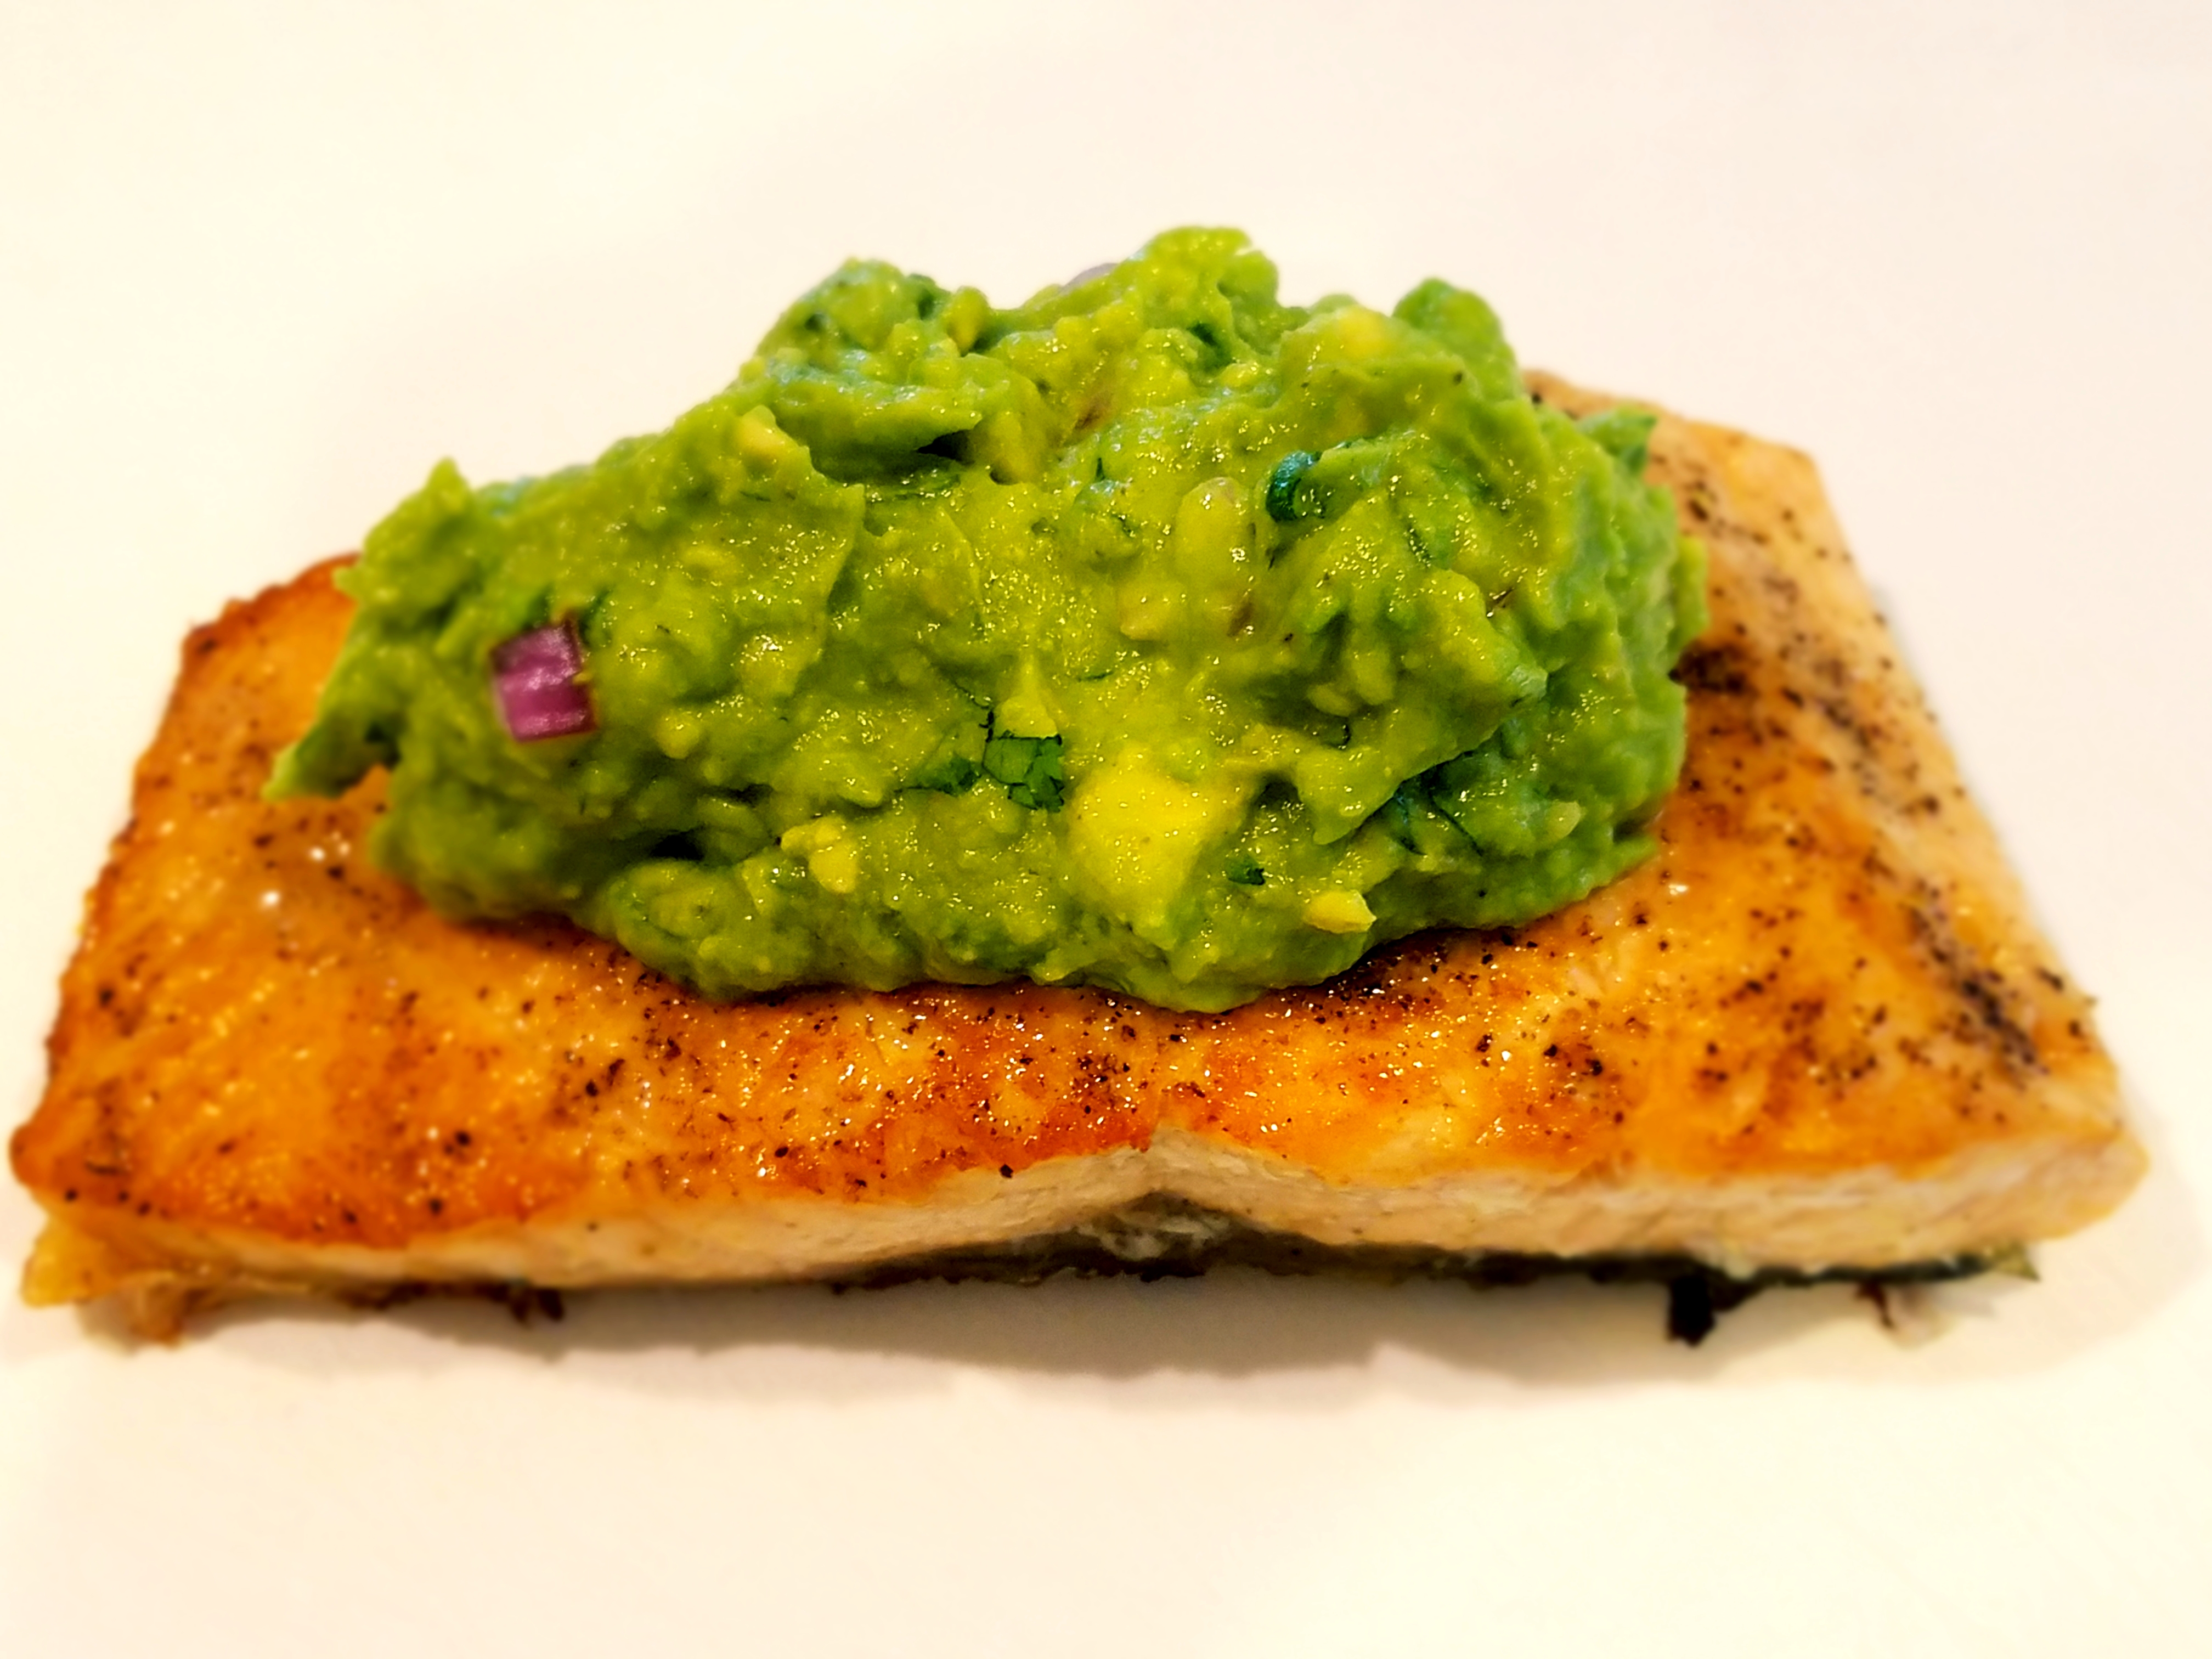 Pan-Seared Salmon with “Company” Guacamole (Recipe inspired by YOU THINK IT, I’LL SAY IT)